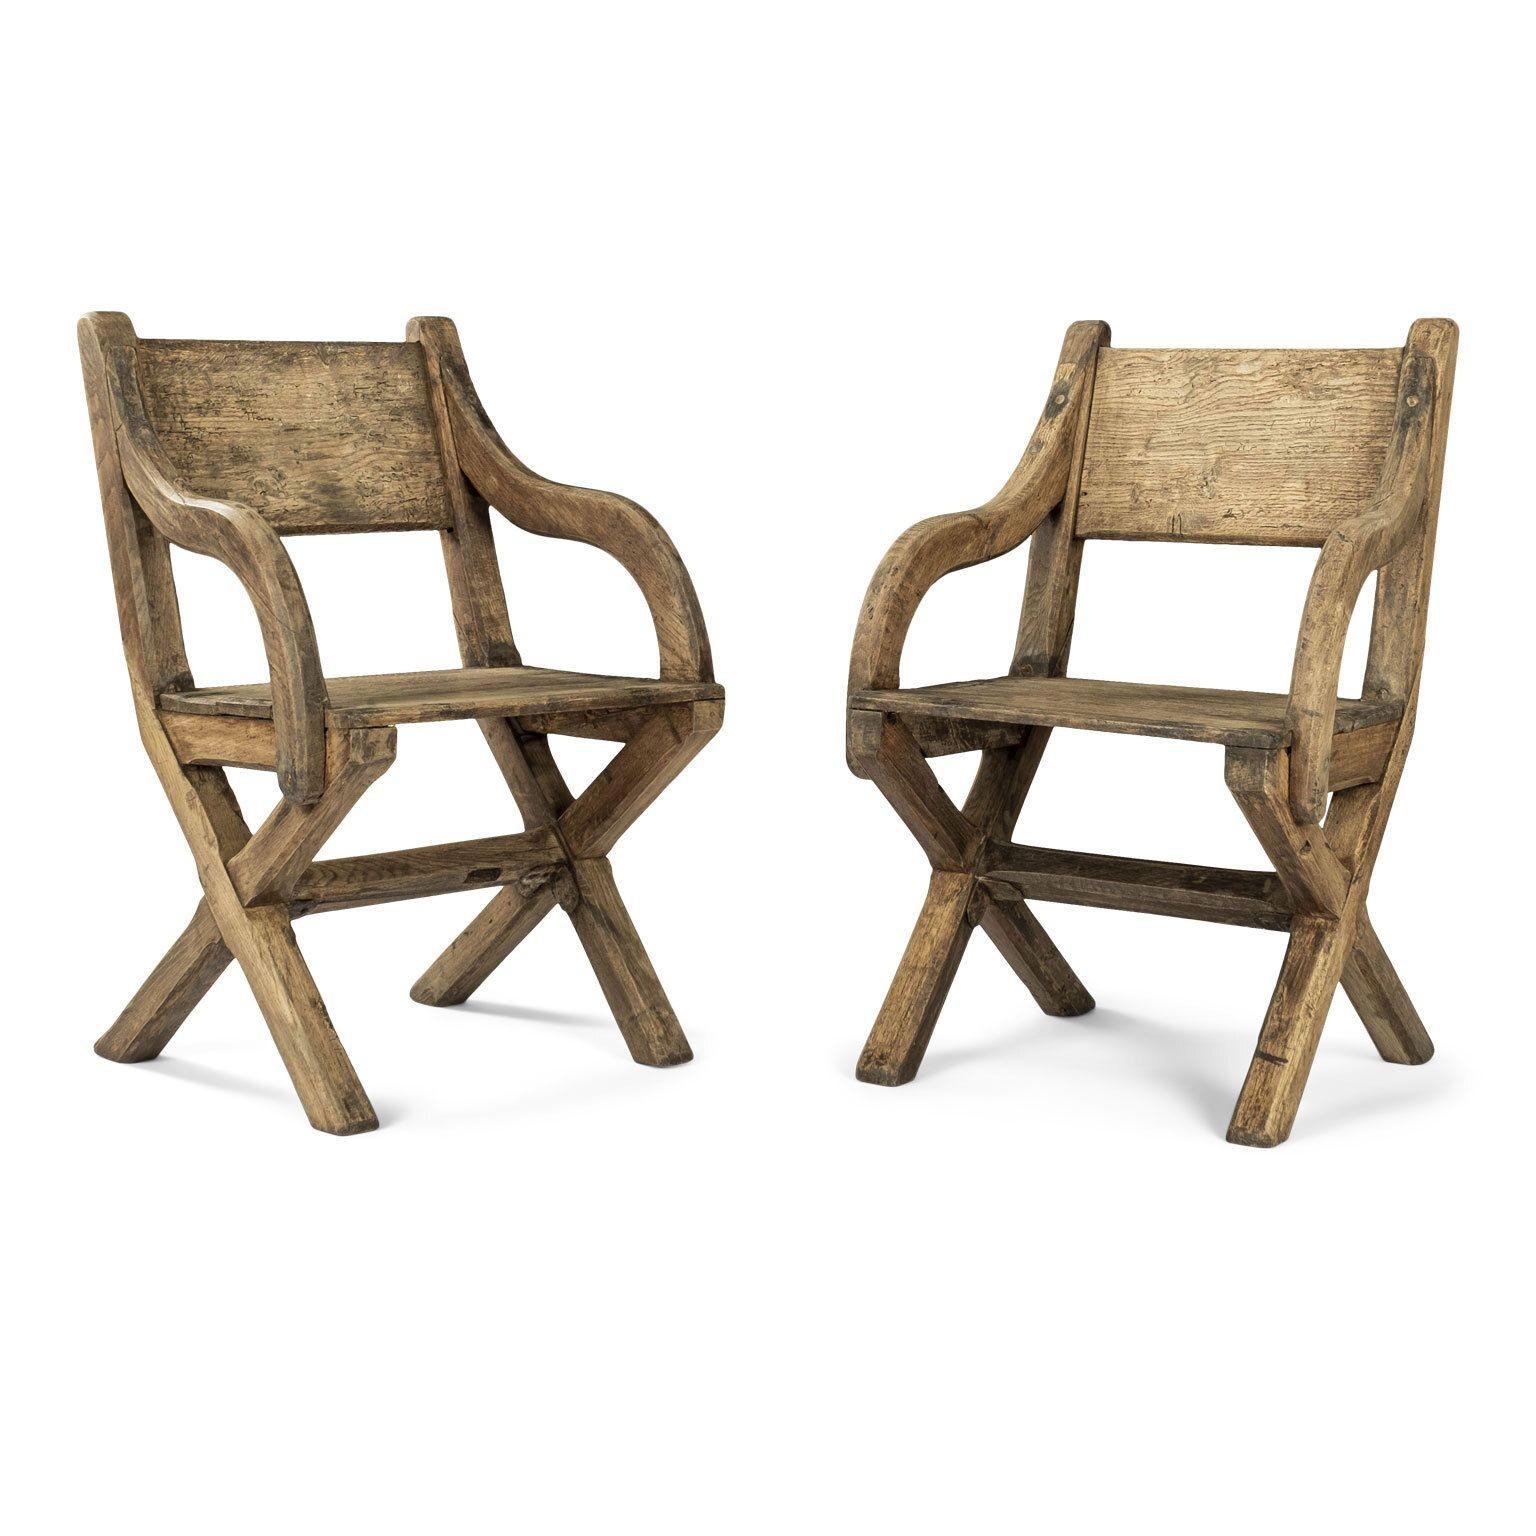 Pair of early oak x-frame armchairs designed in a Glastonbury type style. Chairs feature rectangular backs, curved arm supports and solid seats. X-frame sides united by stretcher reinforced by original iron strapping. Hand-hewn from English oak